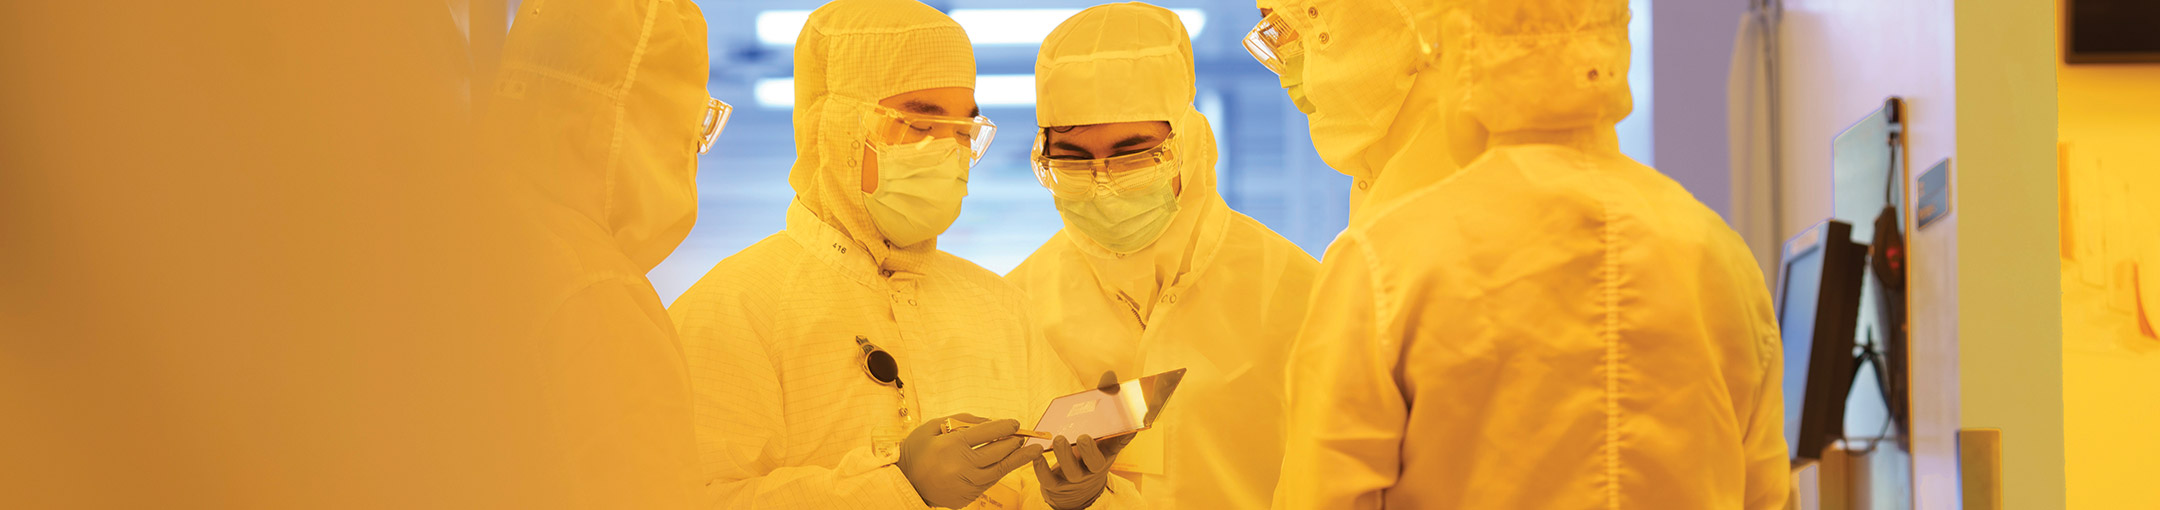 people wearing yellow clean suits looking at a semiconductor.